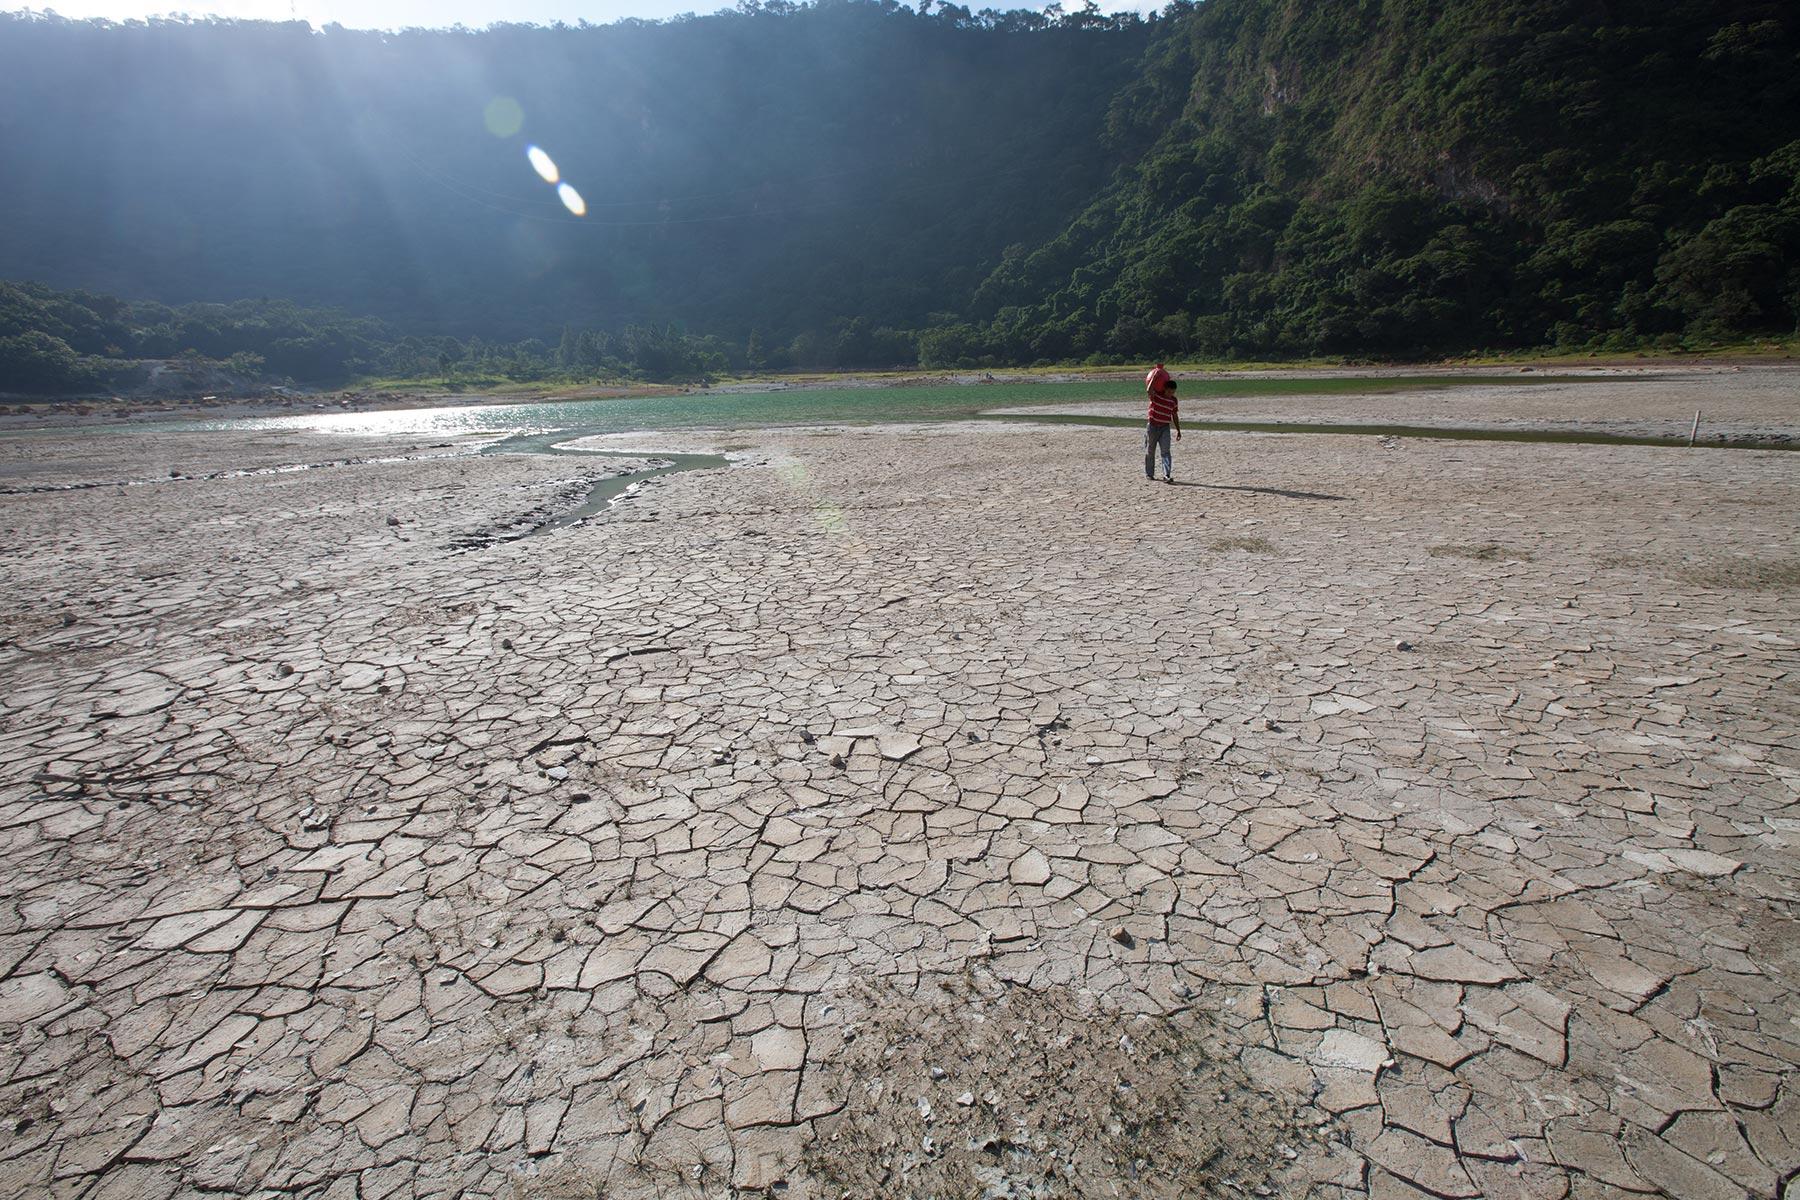 At the lagoon of AlegrÃ­a, UsulutÃ¡n, El Salvador, water levels have dropped dramatically in the drought that is affecting the region. Here, where the water has receded hundreds of meters, a man carries a âcantaroâ of water across the dry lagoon bed. The effect of climate changes in the Central American region are already extreme. Photo: LWF/Sean Hawkey